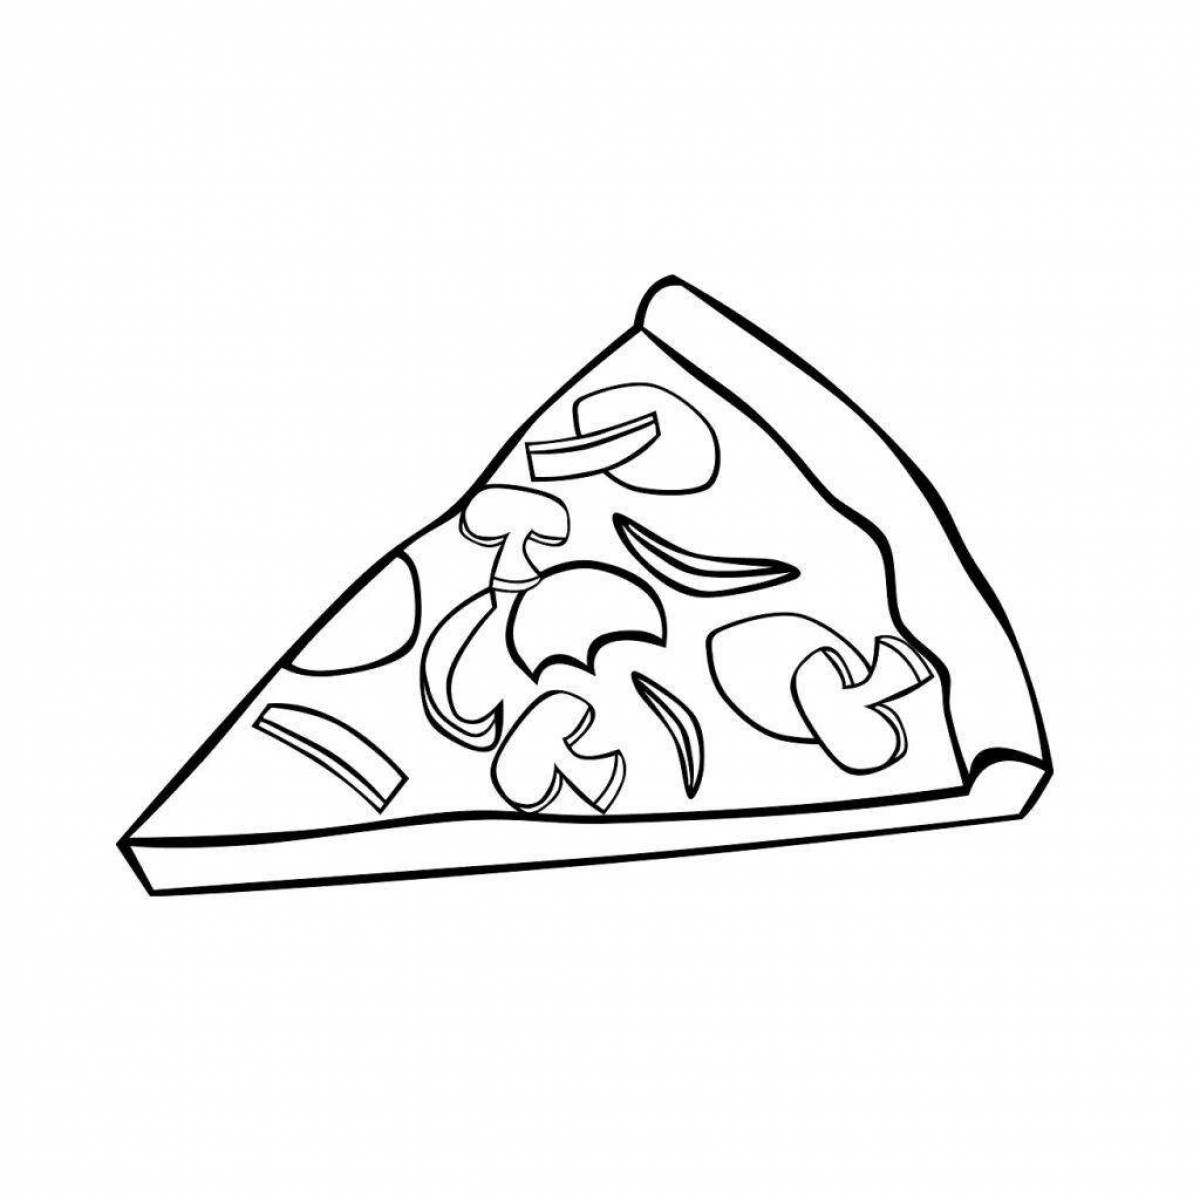 Coloring page irresistible pizza